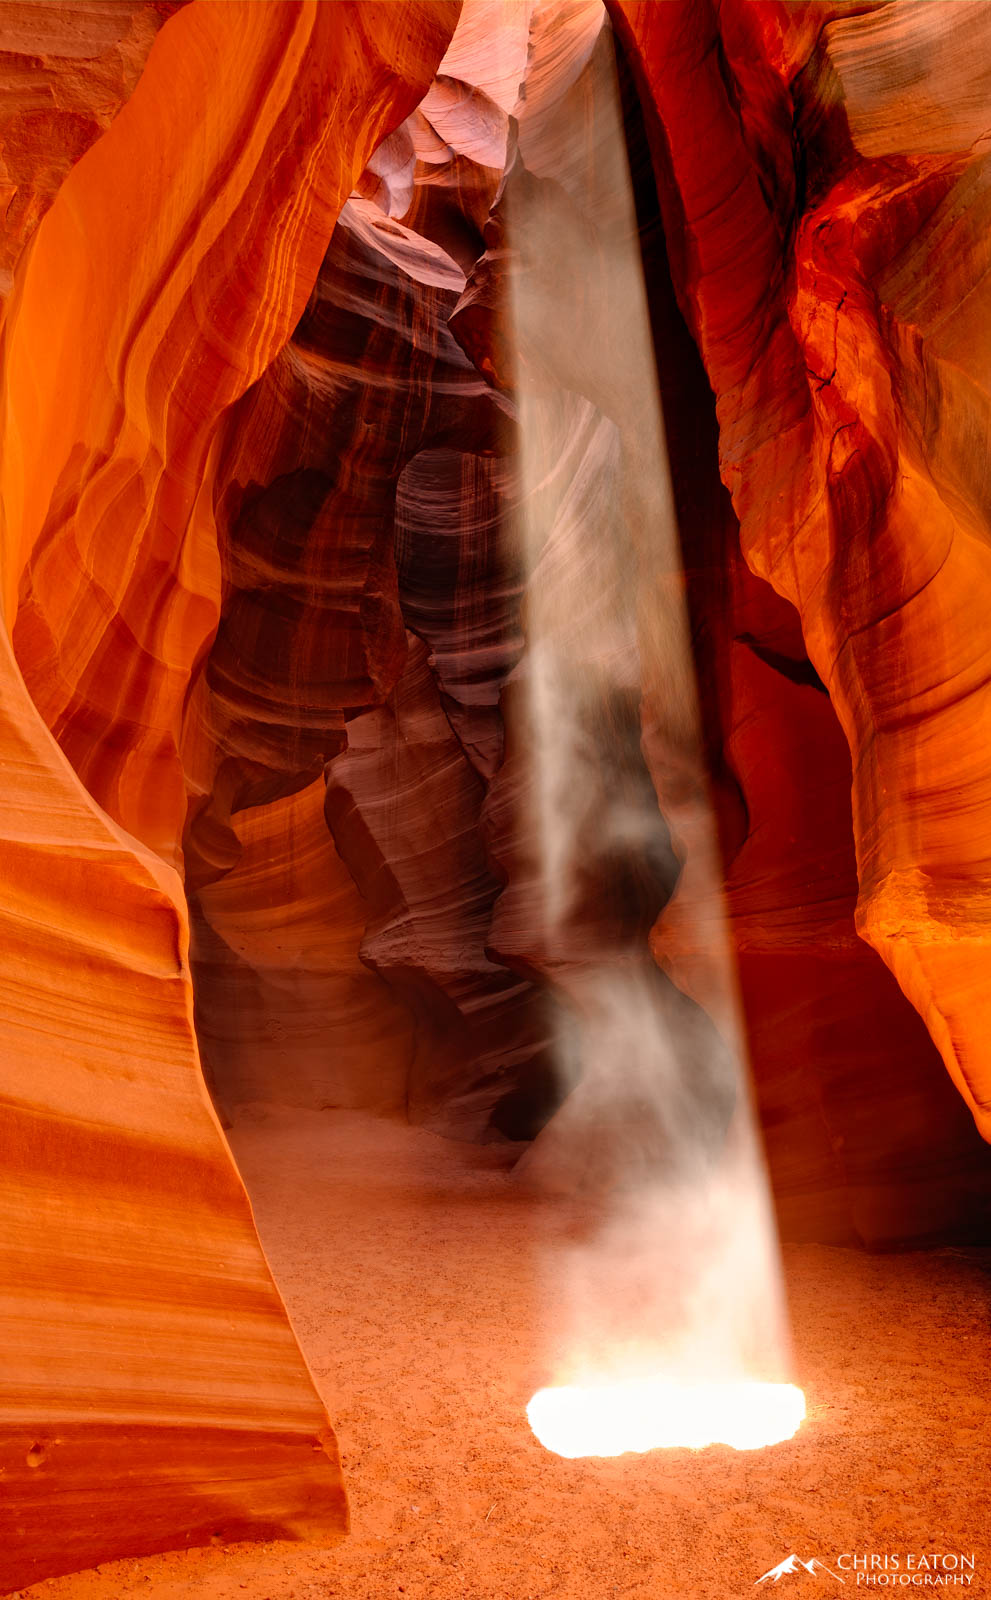 Carved through iron rich Navajo Sandstone, Antelope Canyon is one the many slot canyons of the Colorado Plateau sculpted by flash...